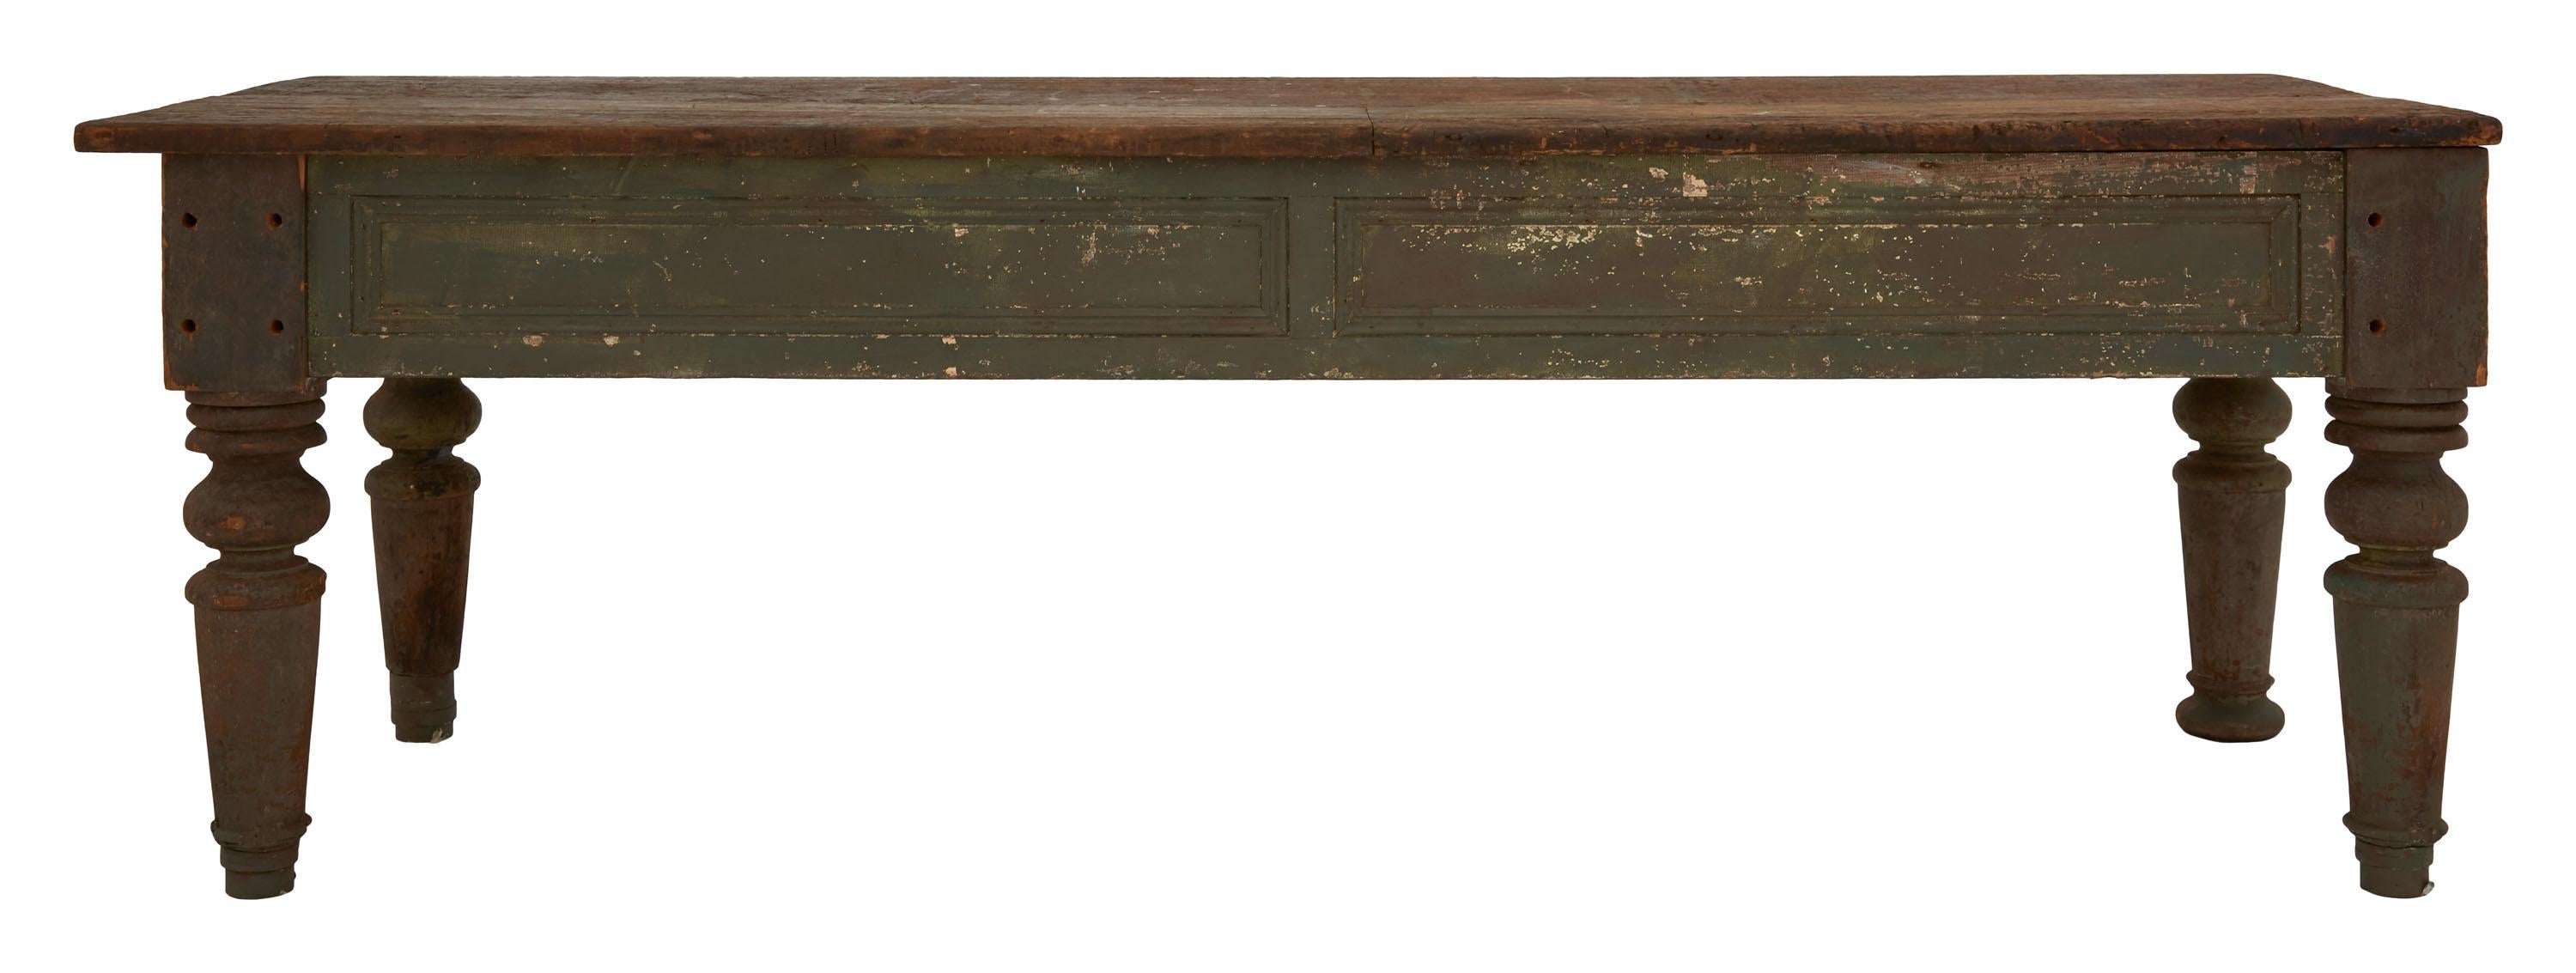 Late 19th Century Painted Wood Farm Table For Sale 2